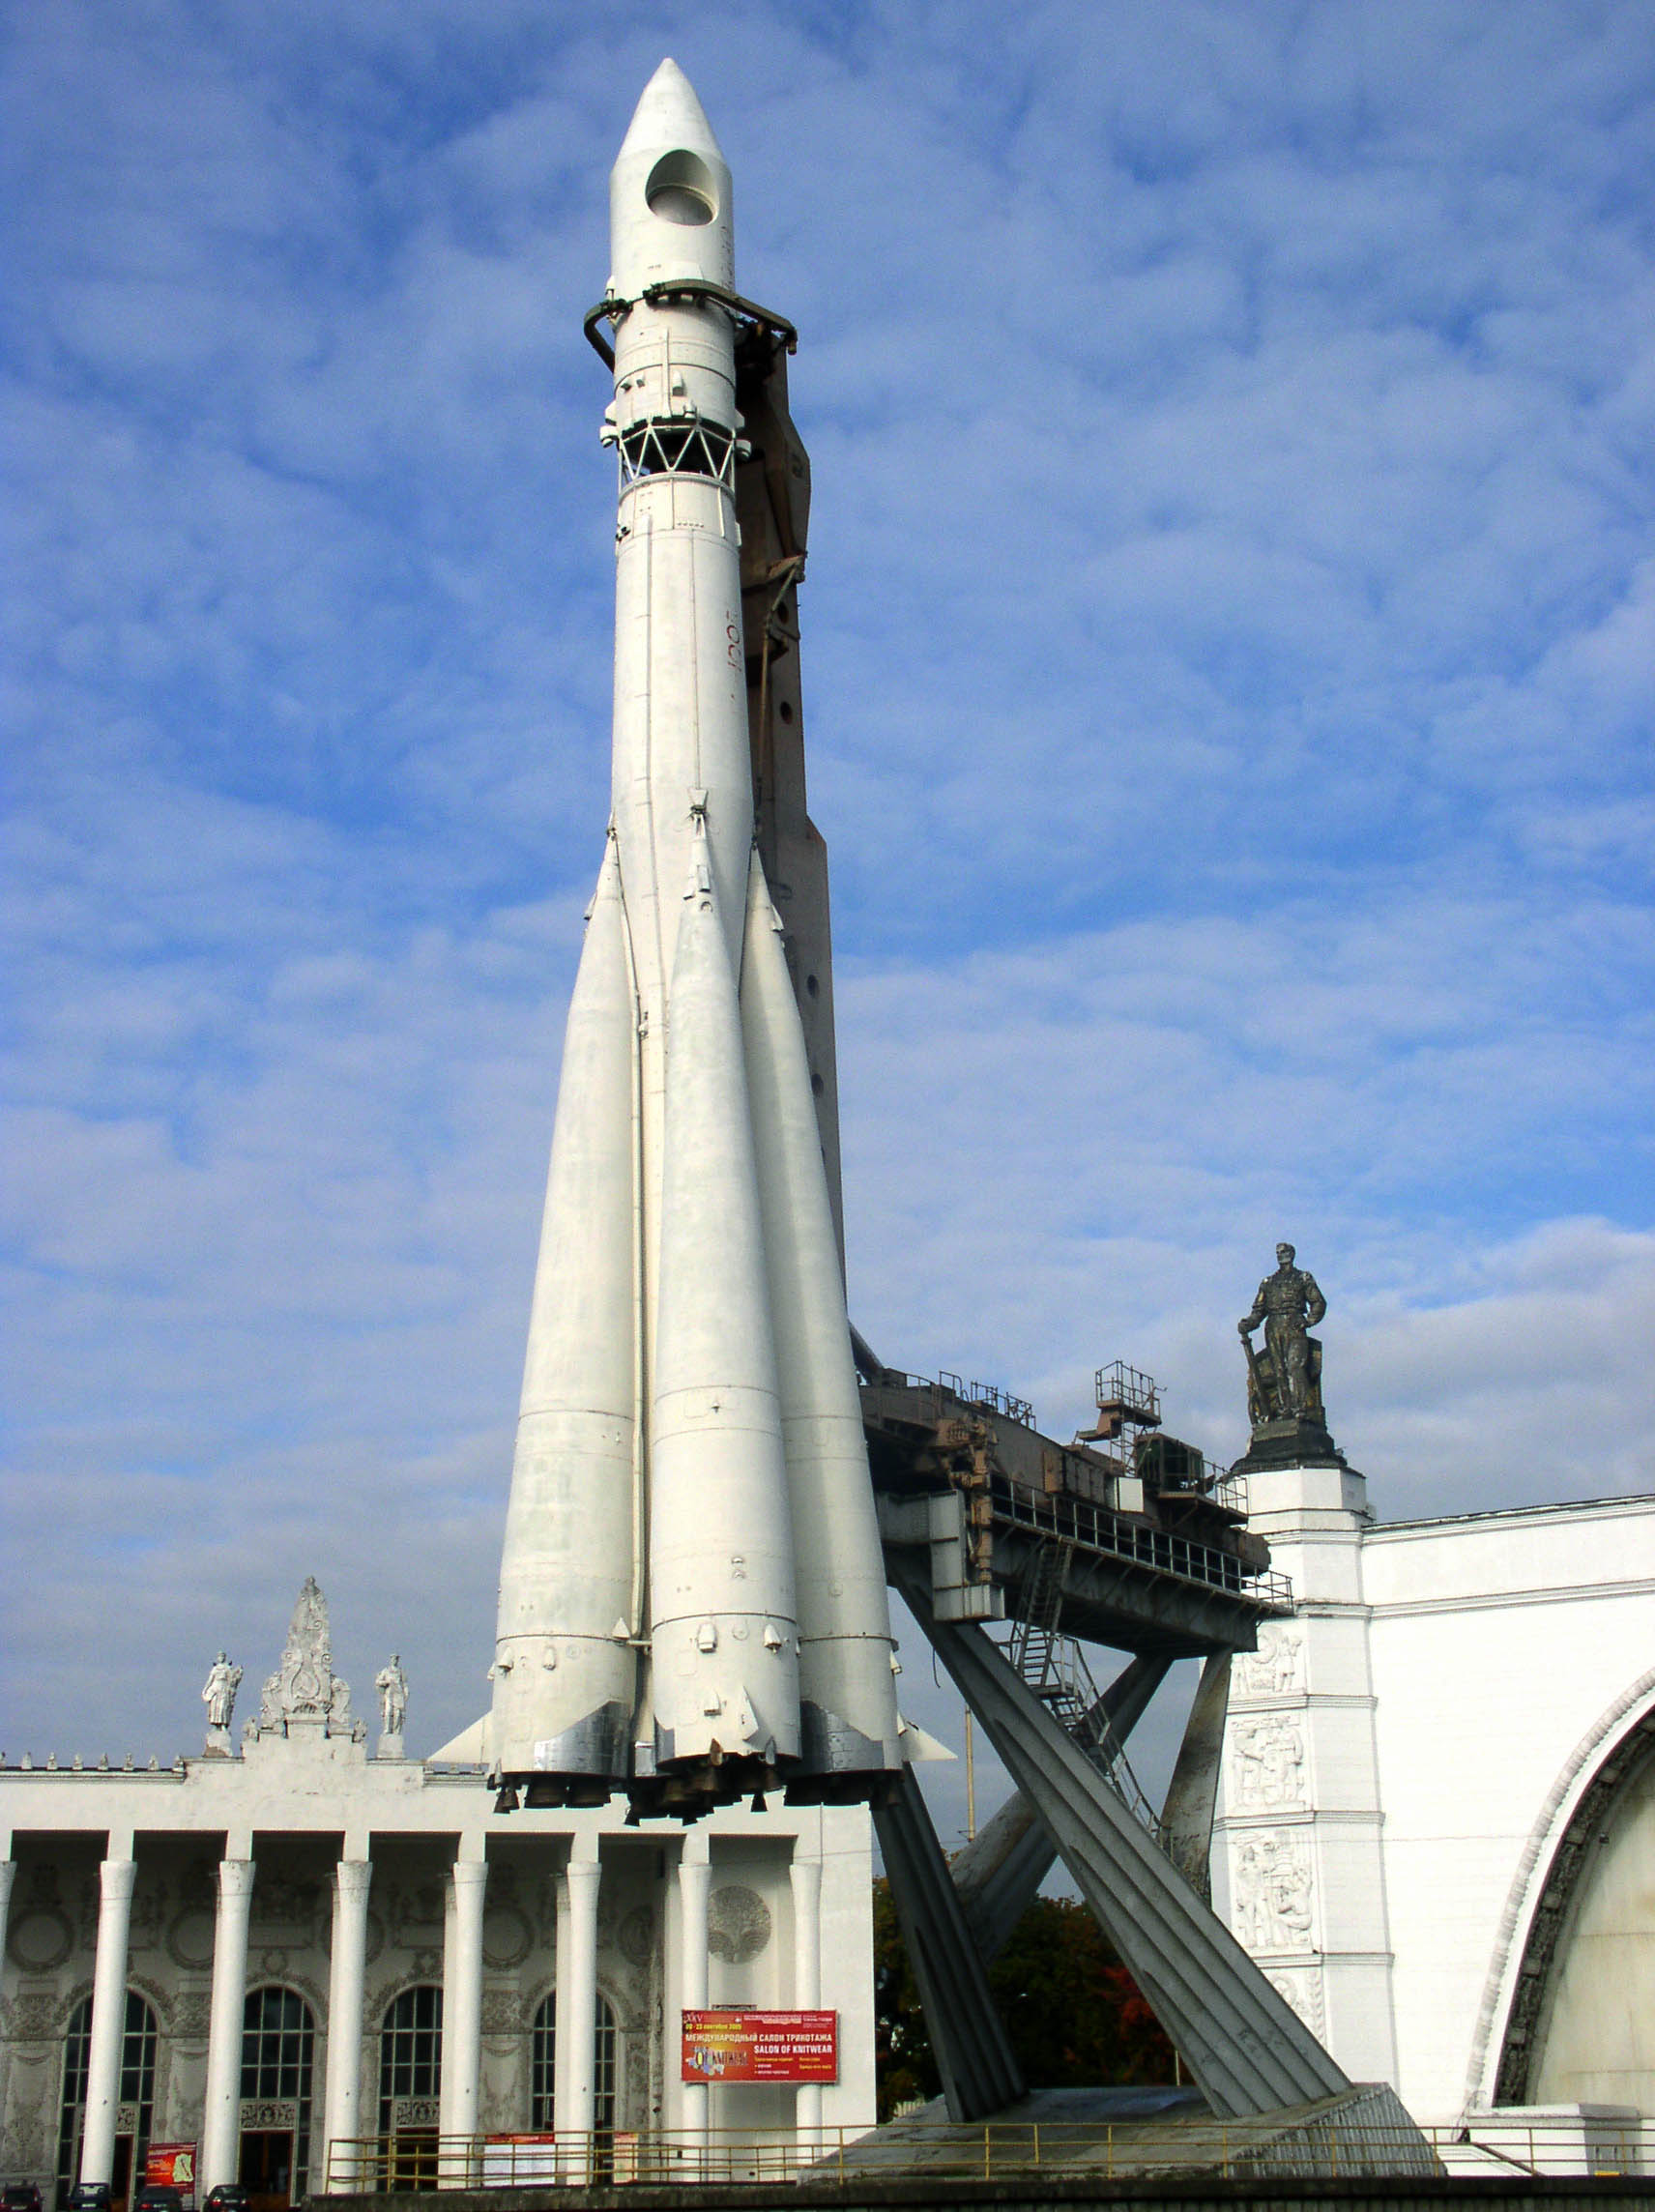 File:Russia-Moscow-VDNH-Rocket R-7-1.jpg - Wikimedia Commons